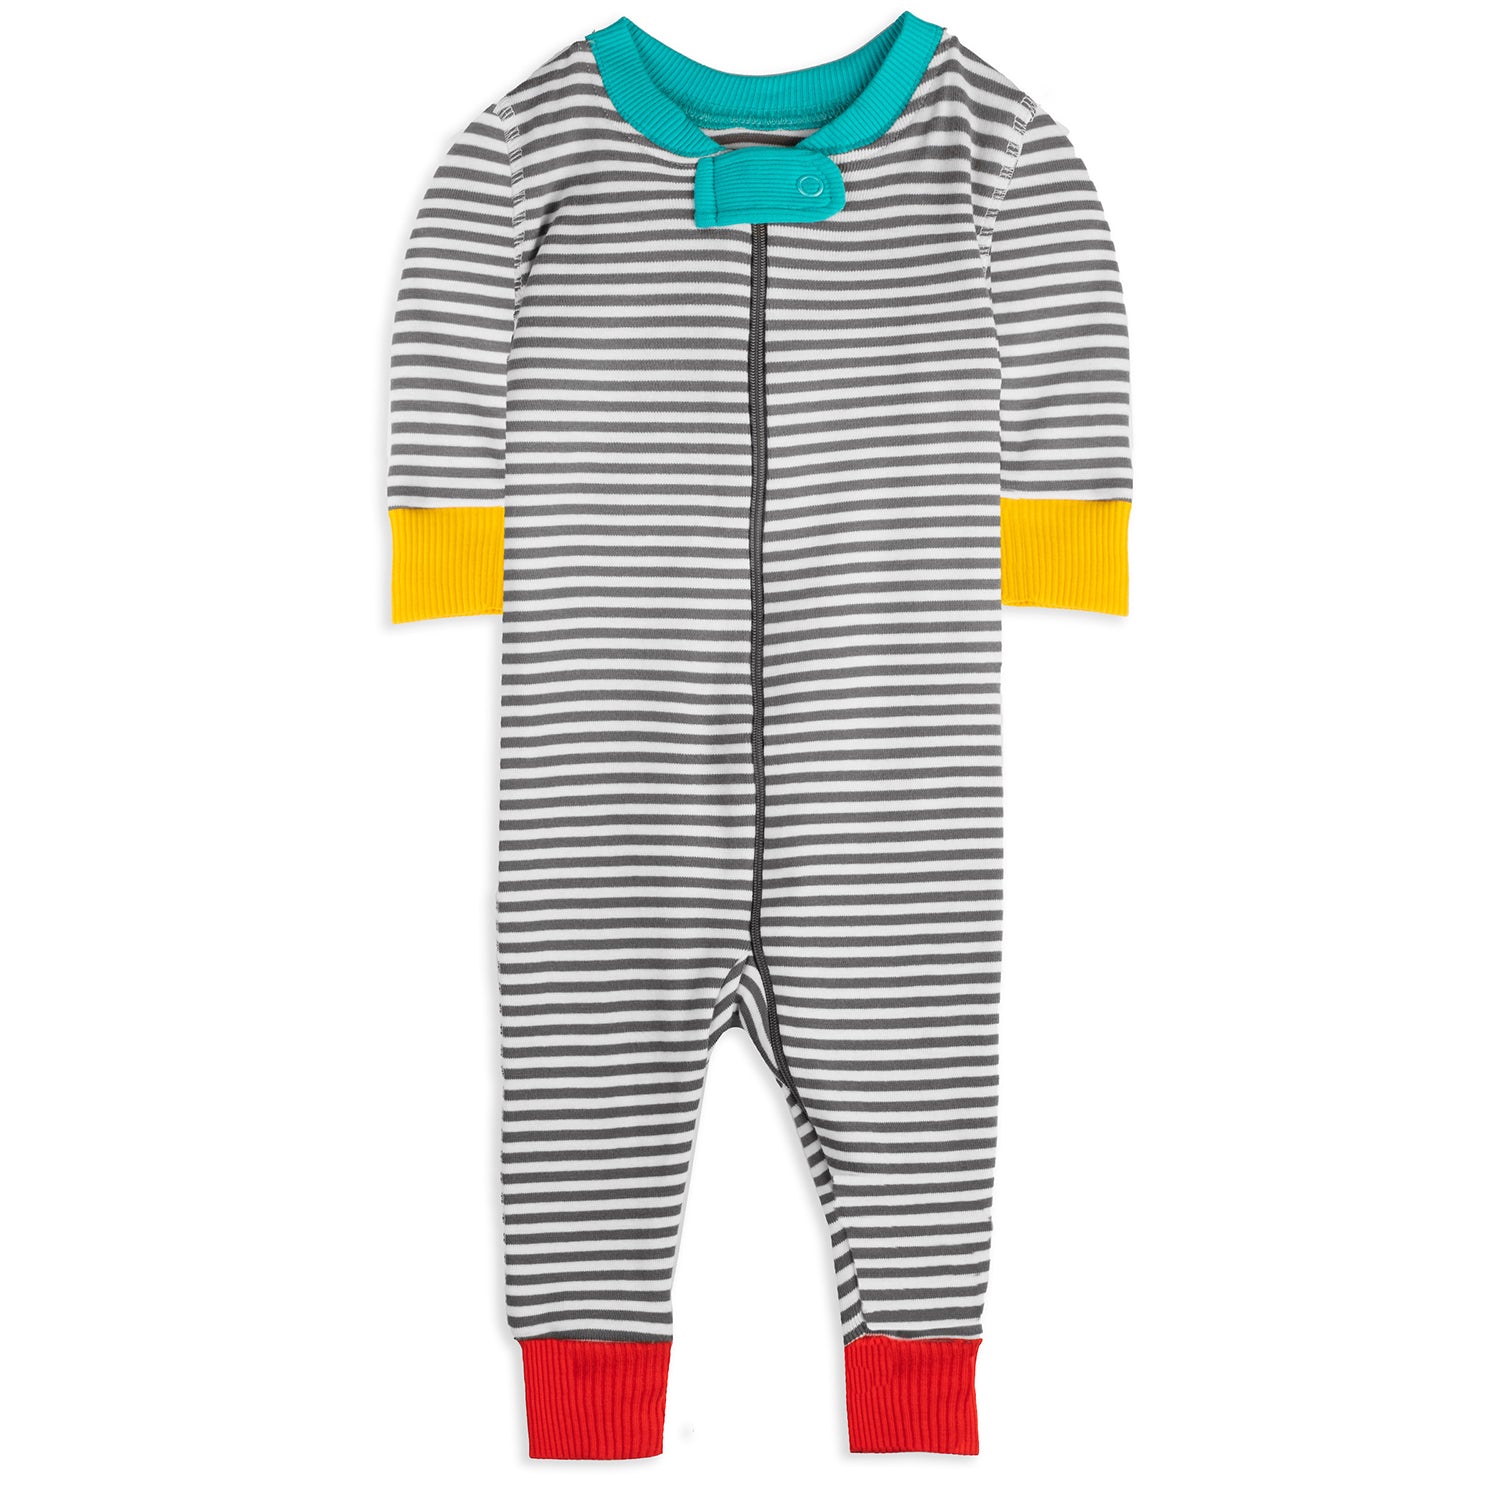 100% Organic Cotton Baby One-piece Playsuit/Sleepers - Mightly